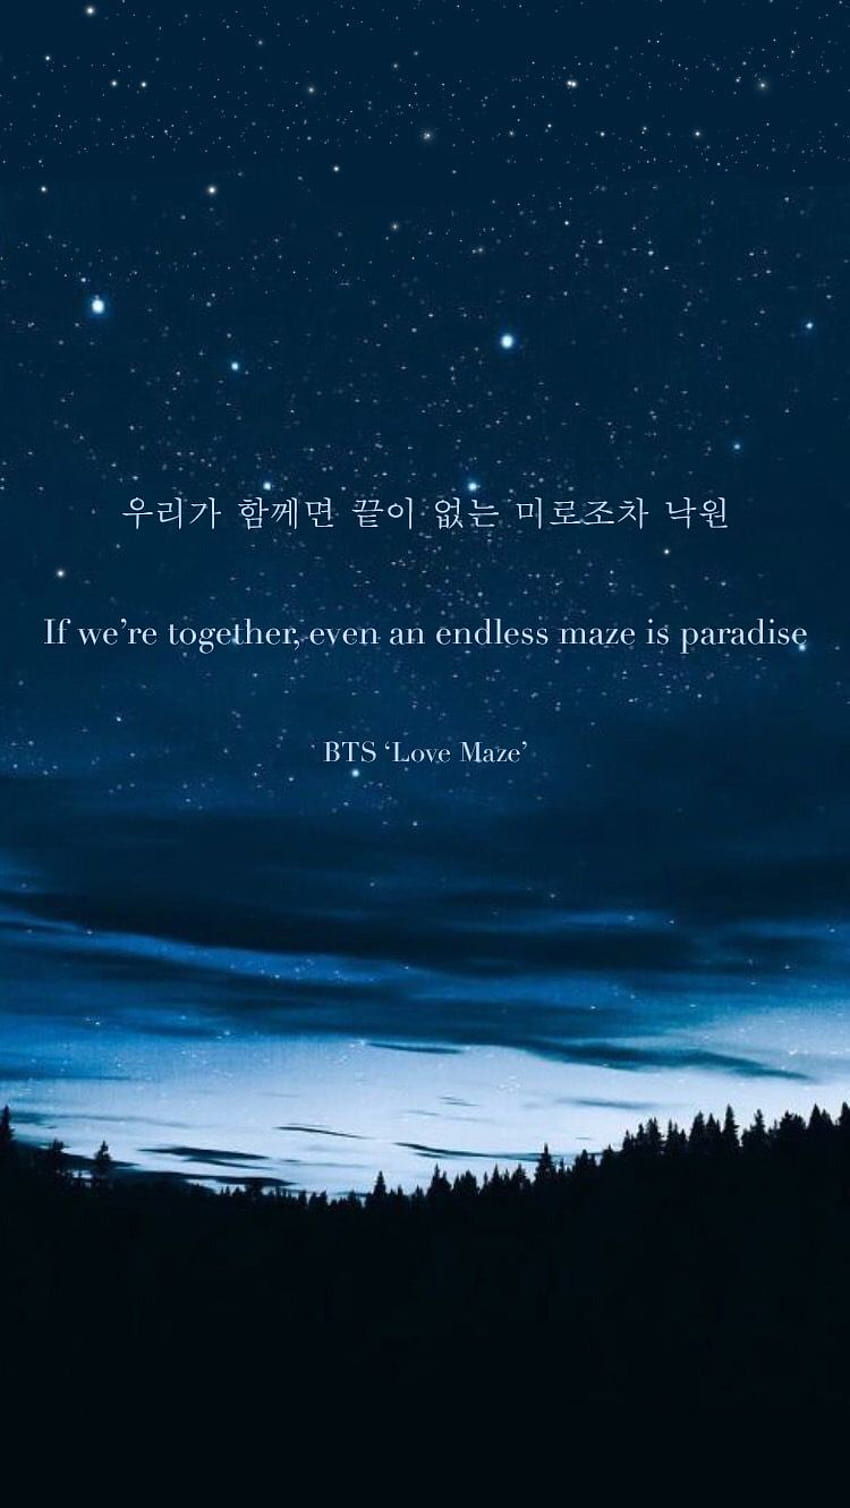 BTS Lyrics - As long as we are together, even the endless